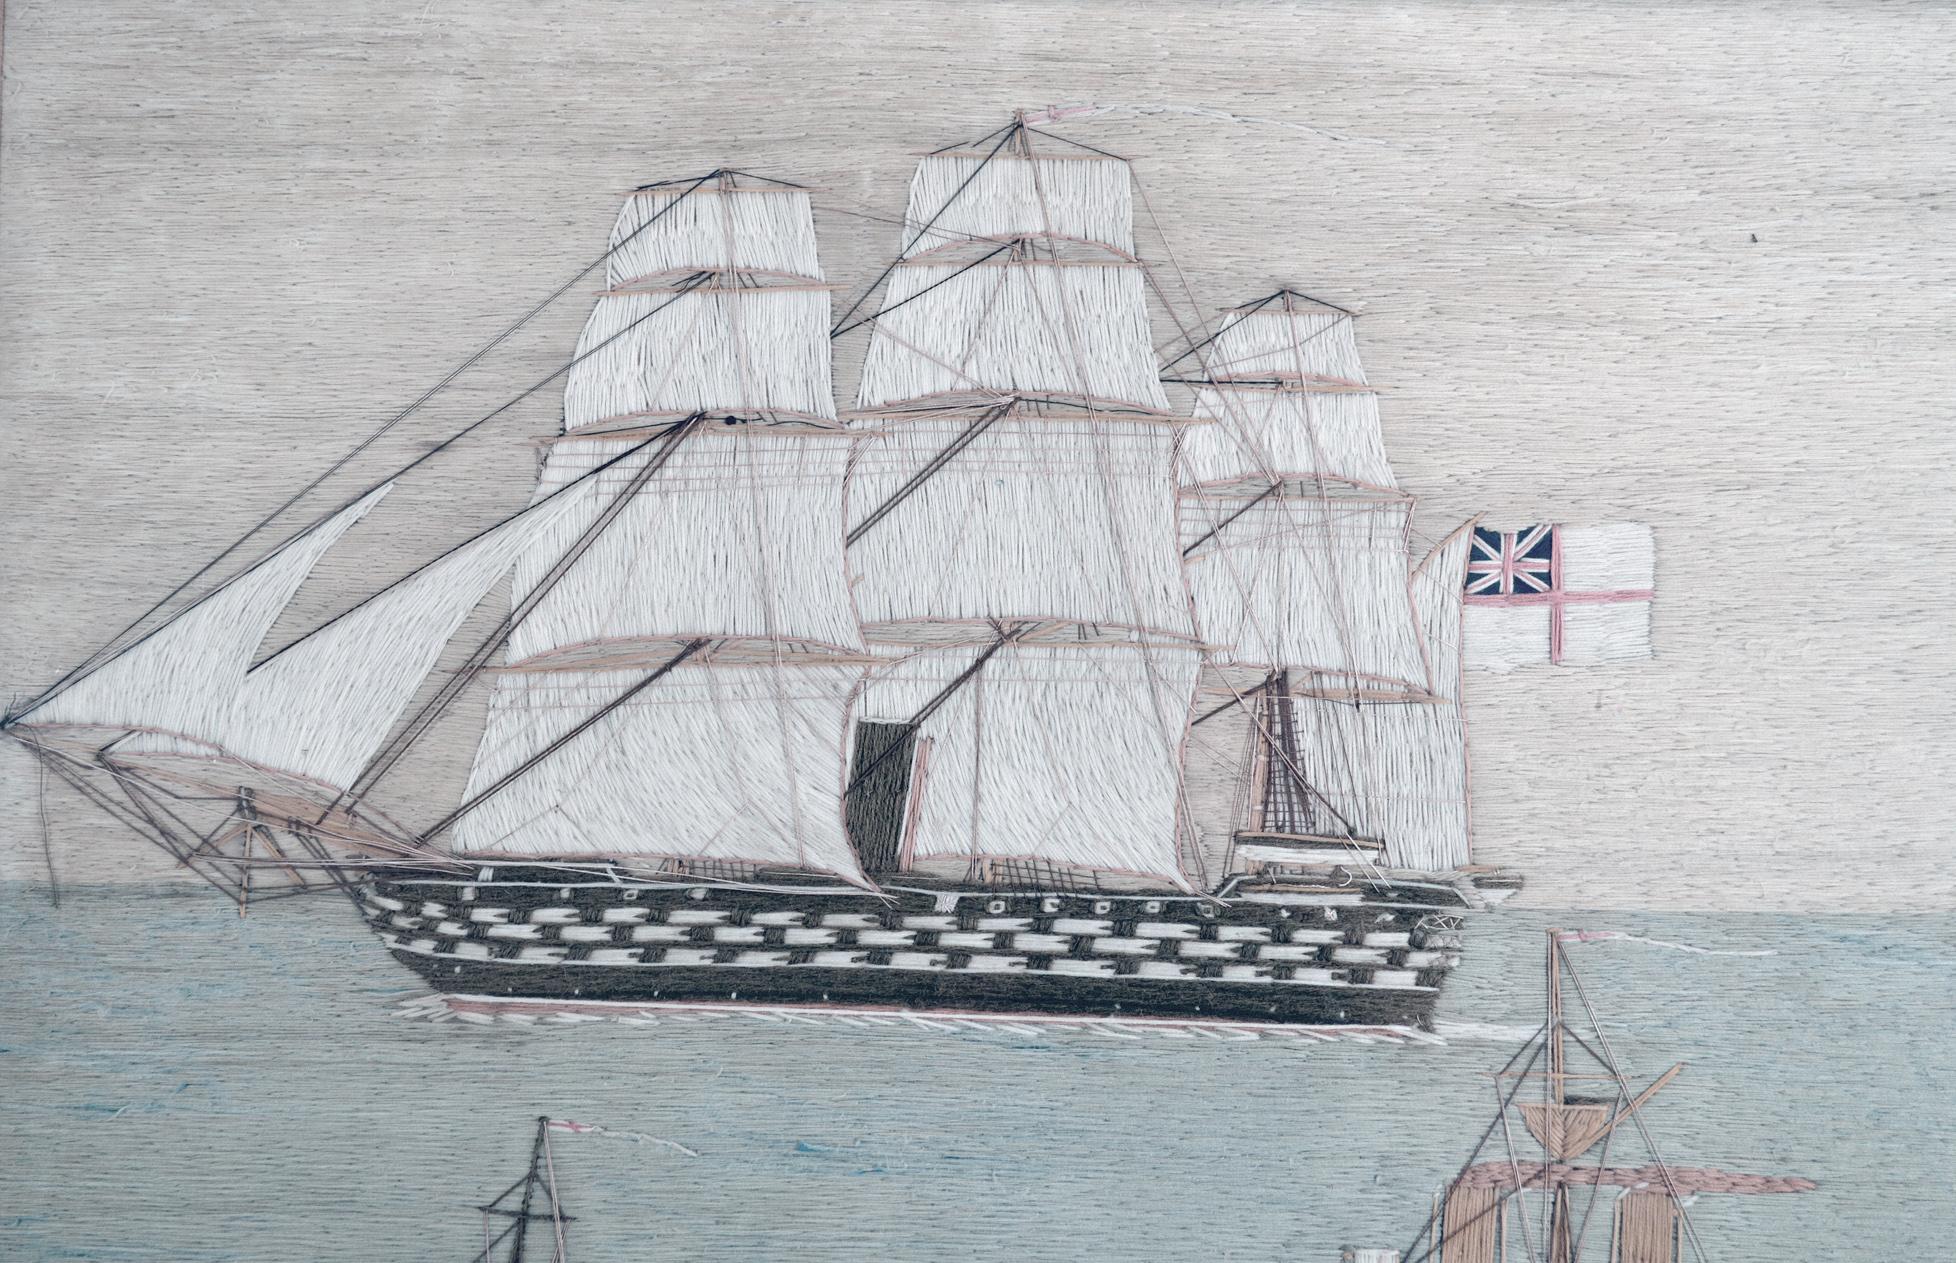 British sailor's woolwork of three royal navy ships
Circa 1885

The British sailor woolwork depicts an unusual scene of three different types of Royal Navy Ships which are all flying the White Ensign. In the background is a 1st Rate Battleship